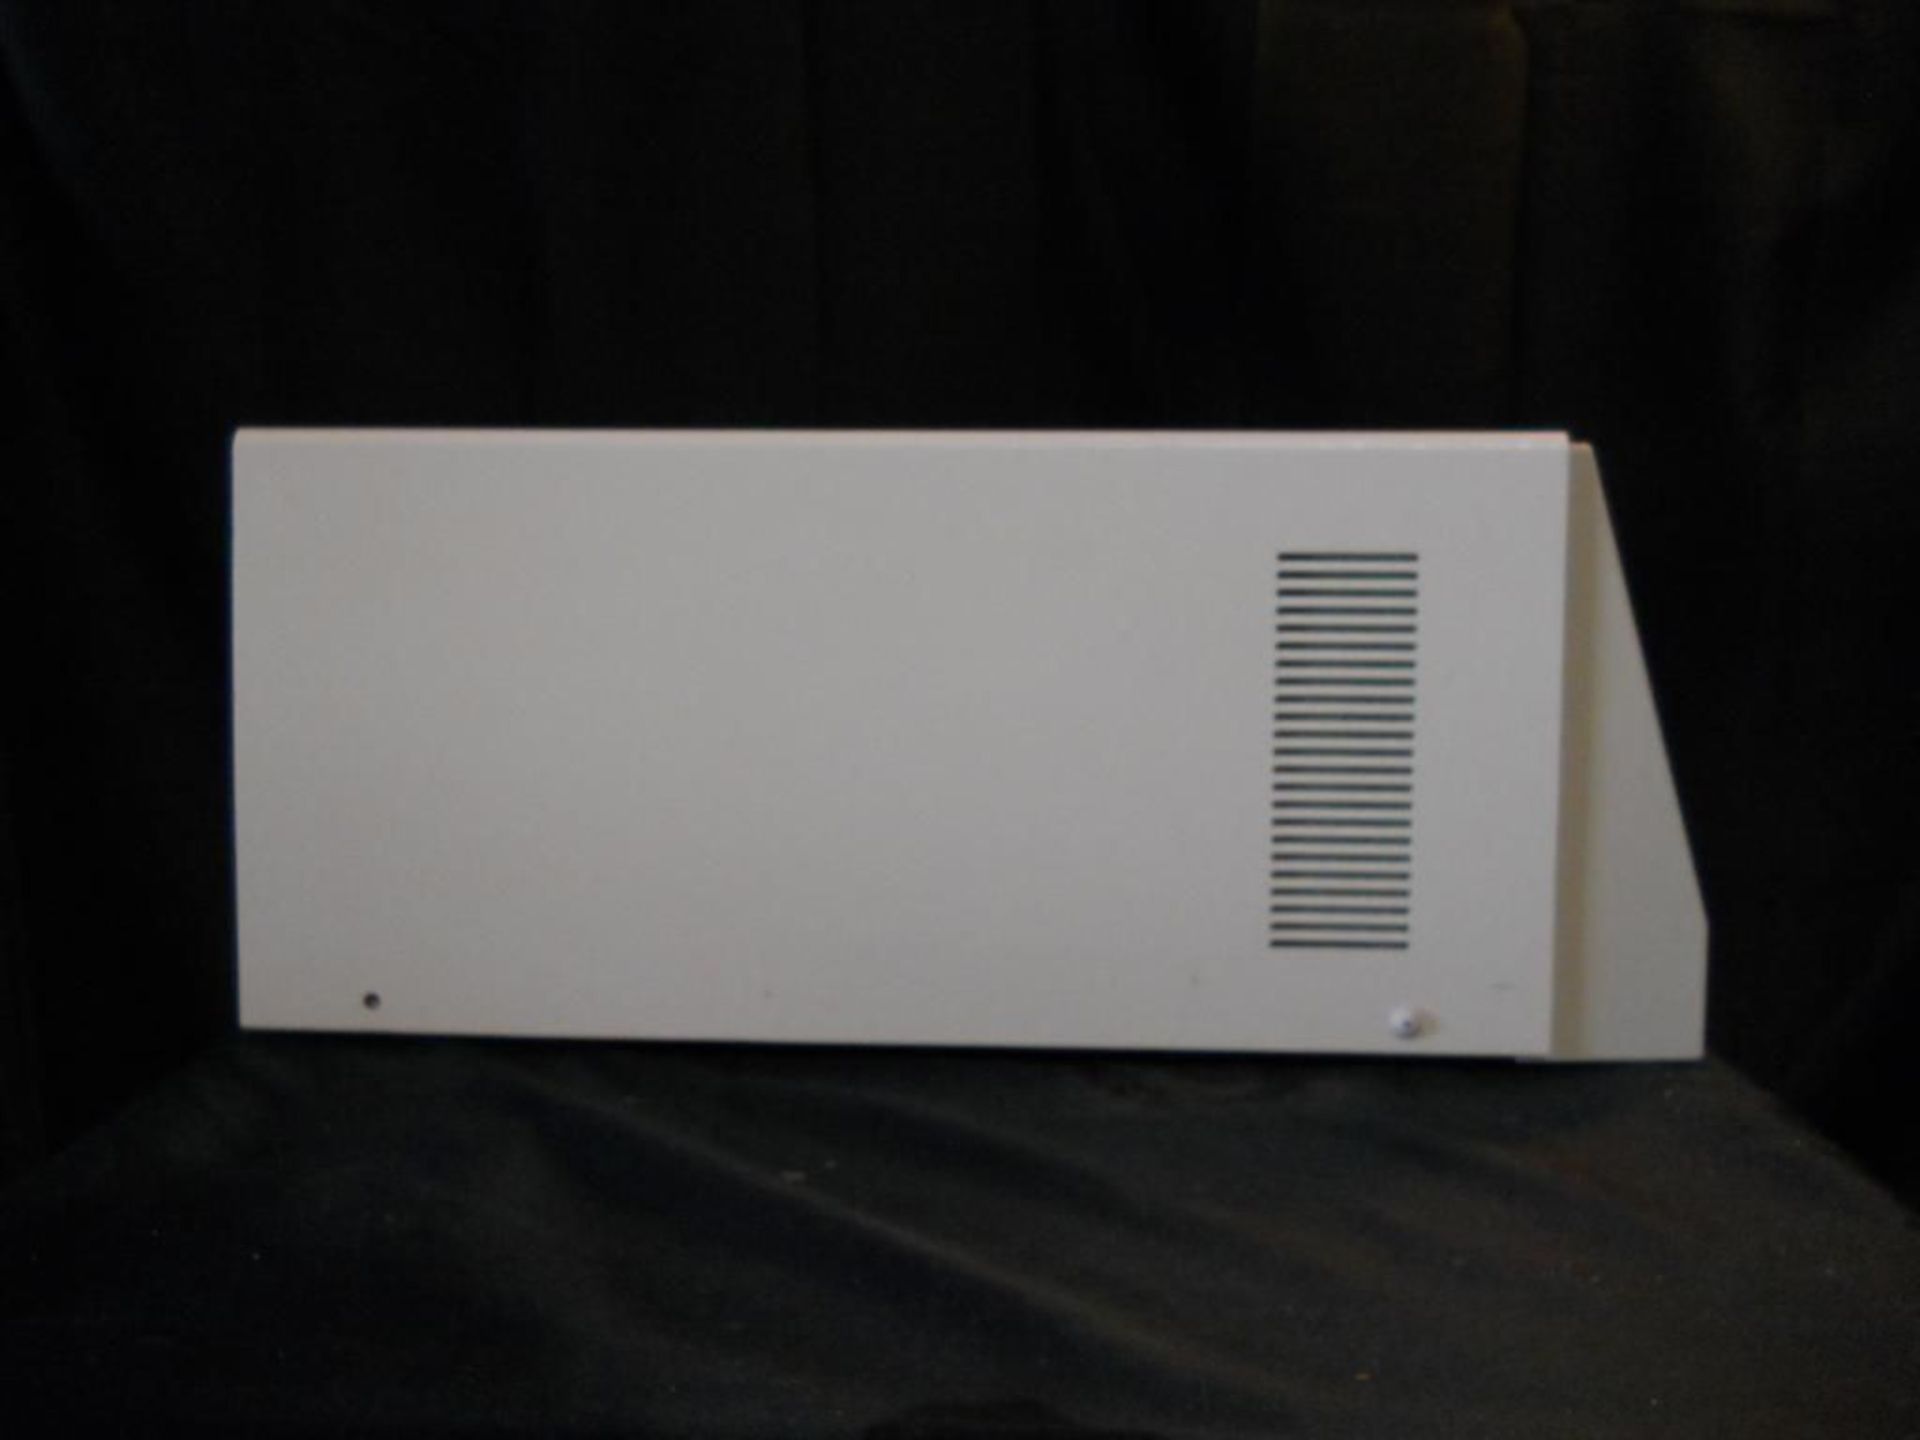 Waters 486 Turnable Absorbance Detector Model M486 HPLC, Qty 1, 221190010001 - Image 7 of 7